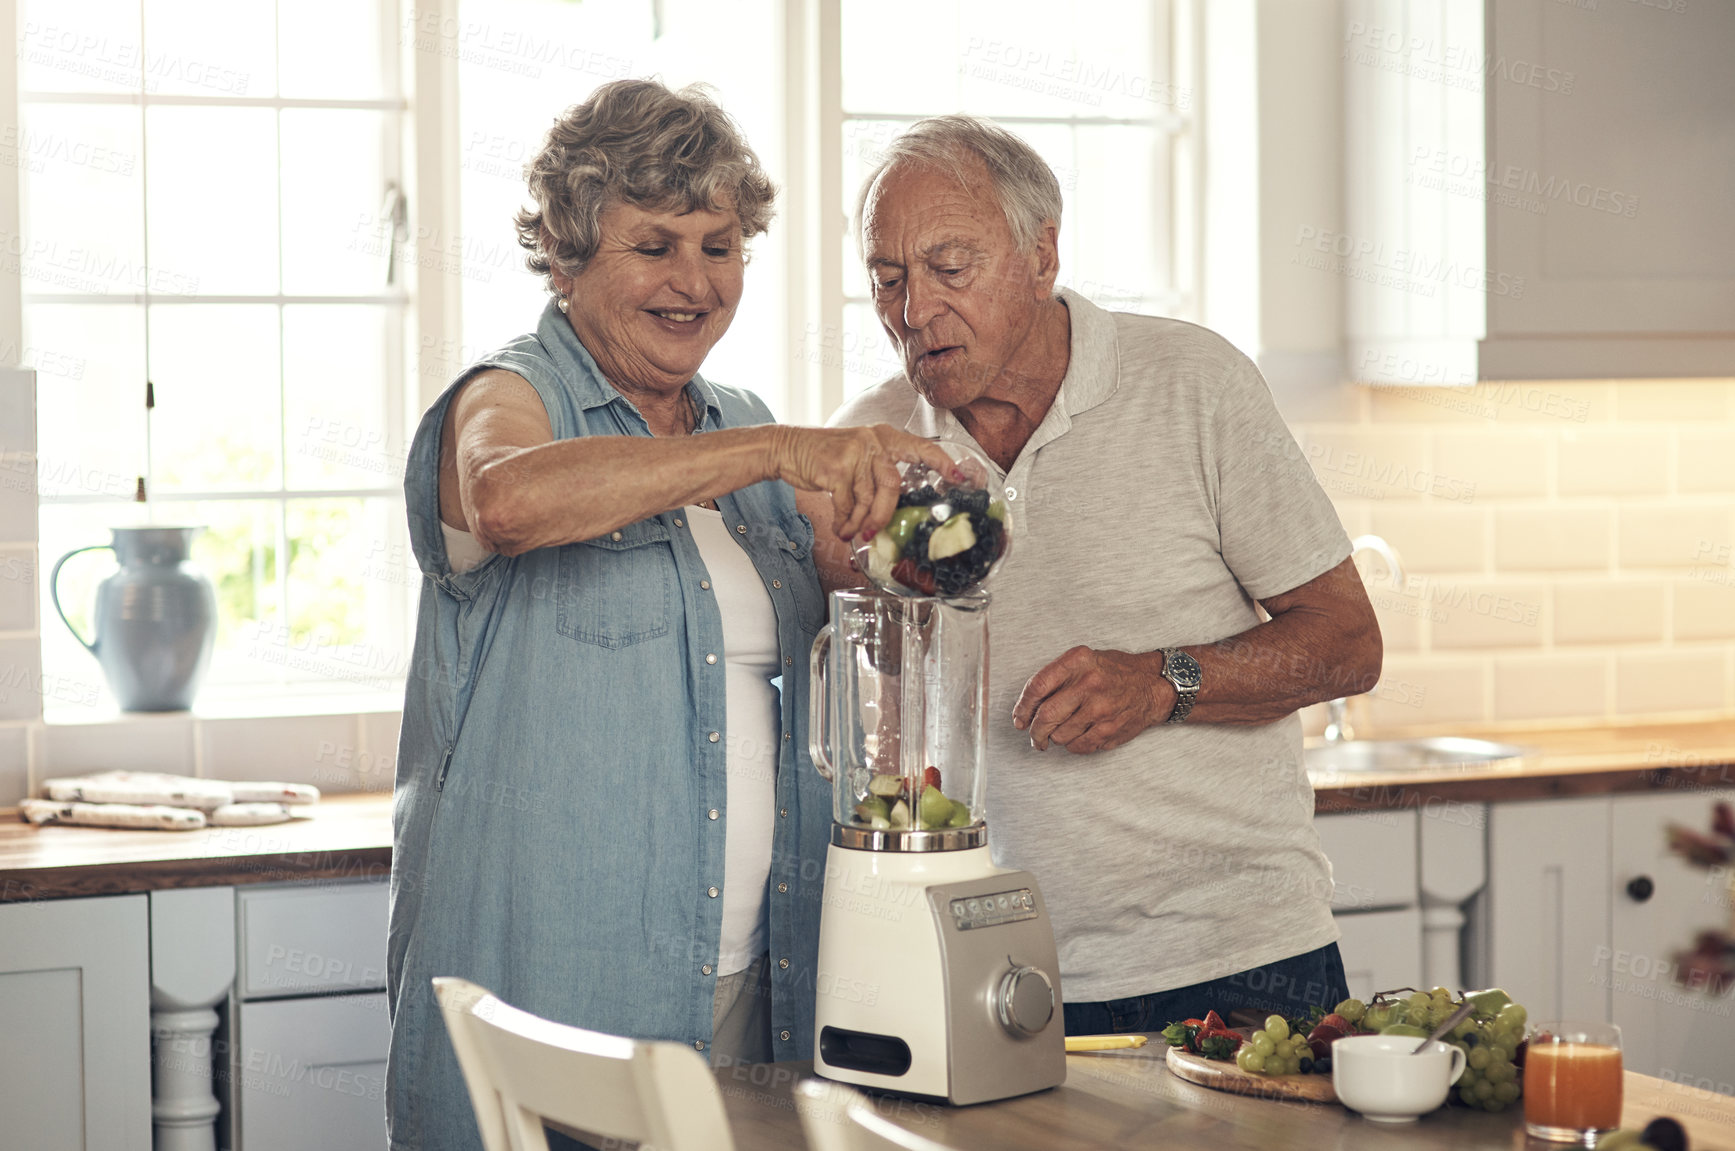 Buy stock photo Shot of a senior couple making a smoothie in the kitchen at home